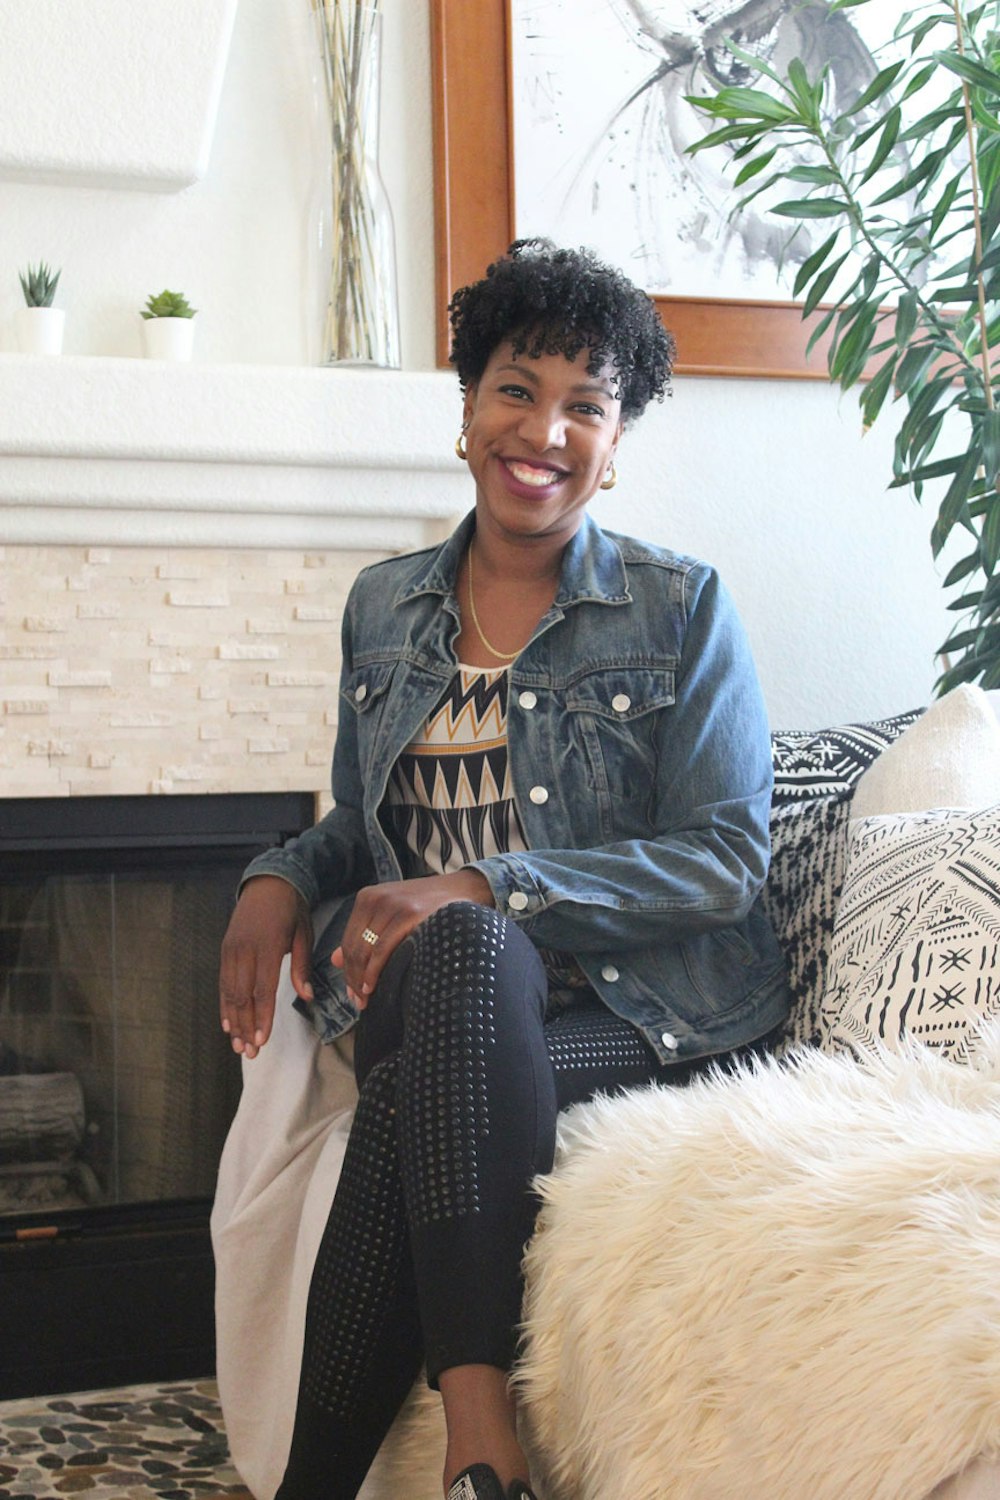 Decorating Burnout Is Real! A Conversation With Interior Design Specialist, Danni Sinclair